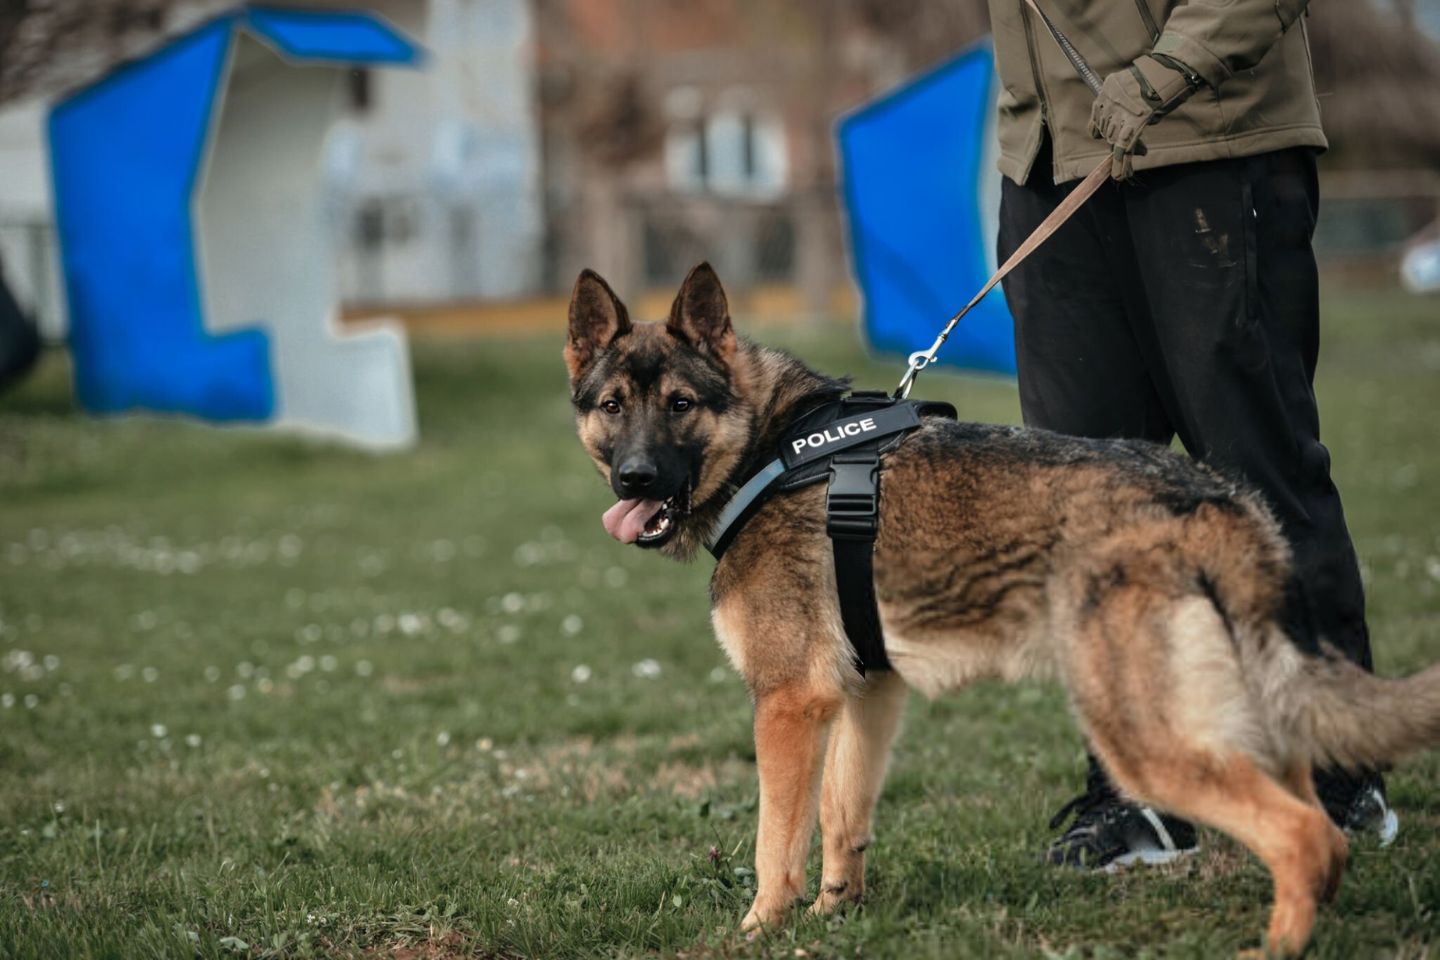 The Dog Performing Police or Military Work